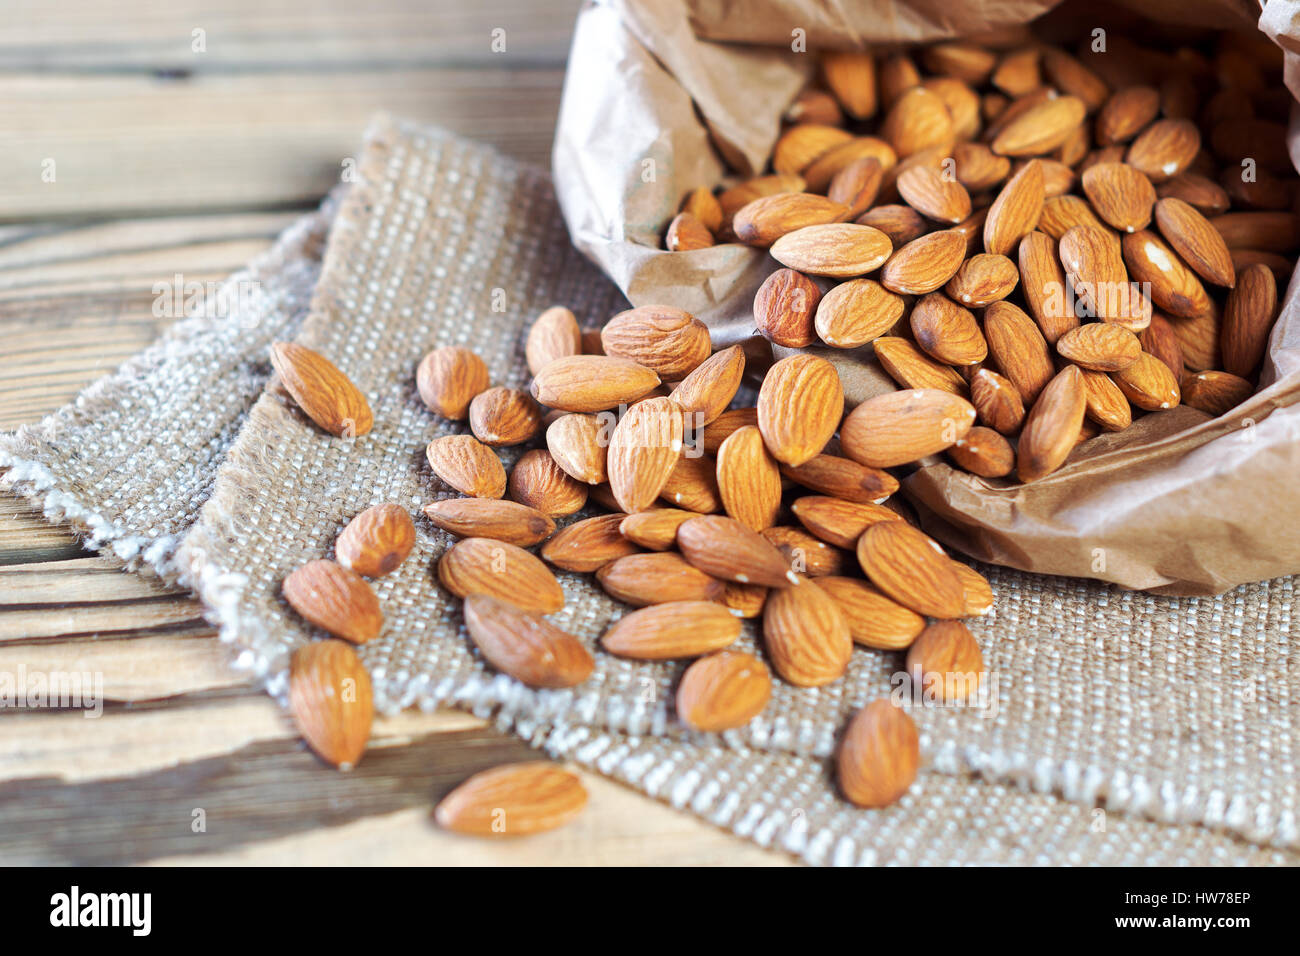 Almonds, pour out on wooden table out of a paper bag. Healthy eating. Stock Photo